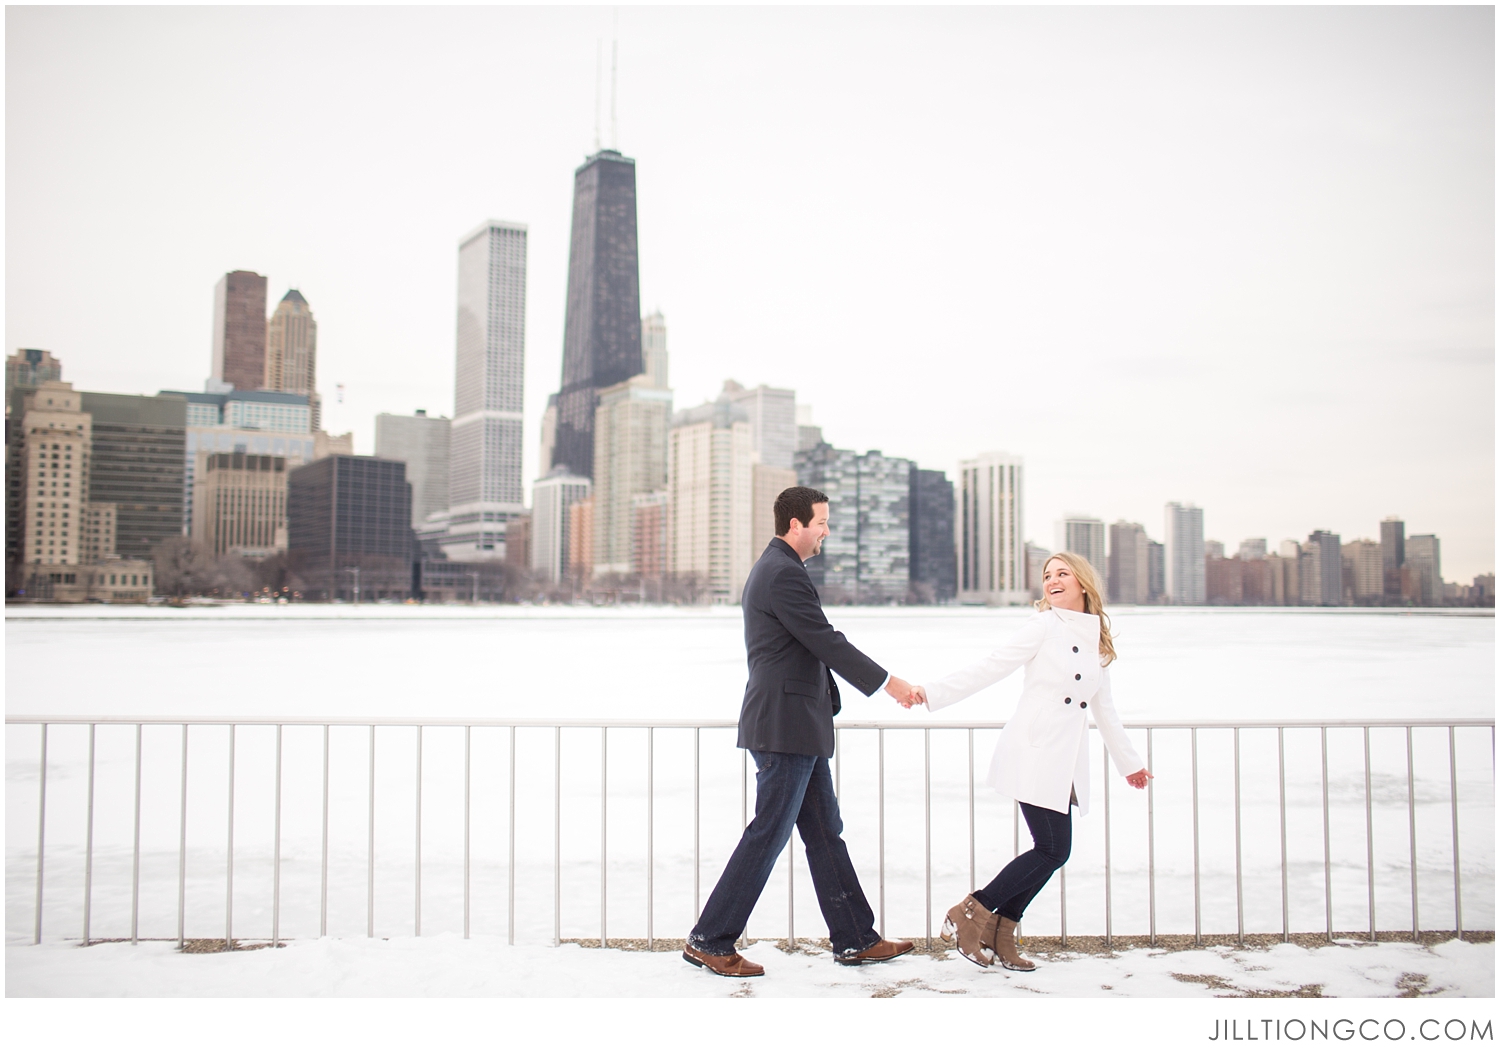 Olive Park Engagement Photos | Chicago Engagement Photos | Chicago Engagement Photos Location Ideas | Jill Tiongco Photography